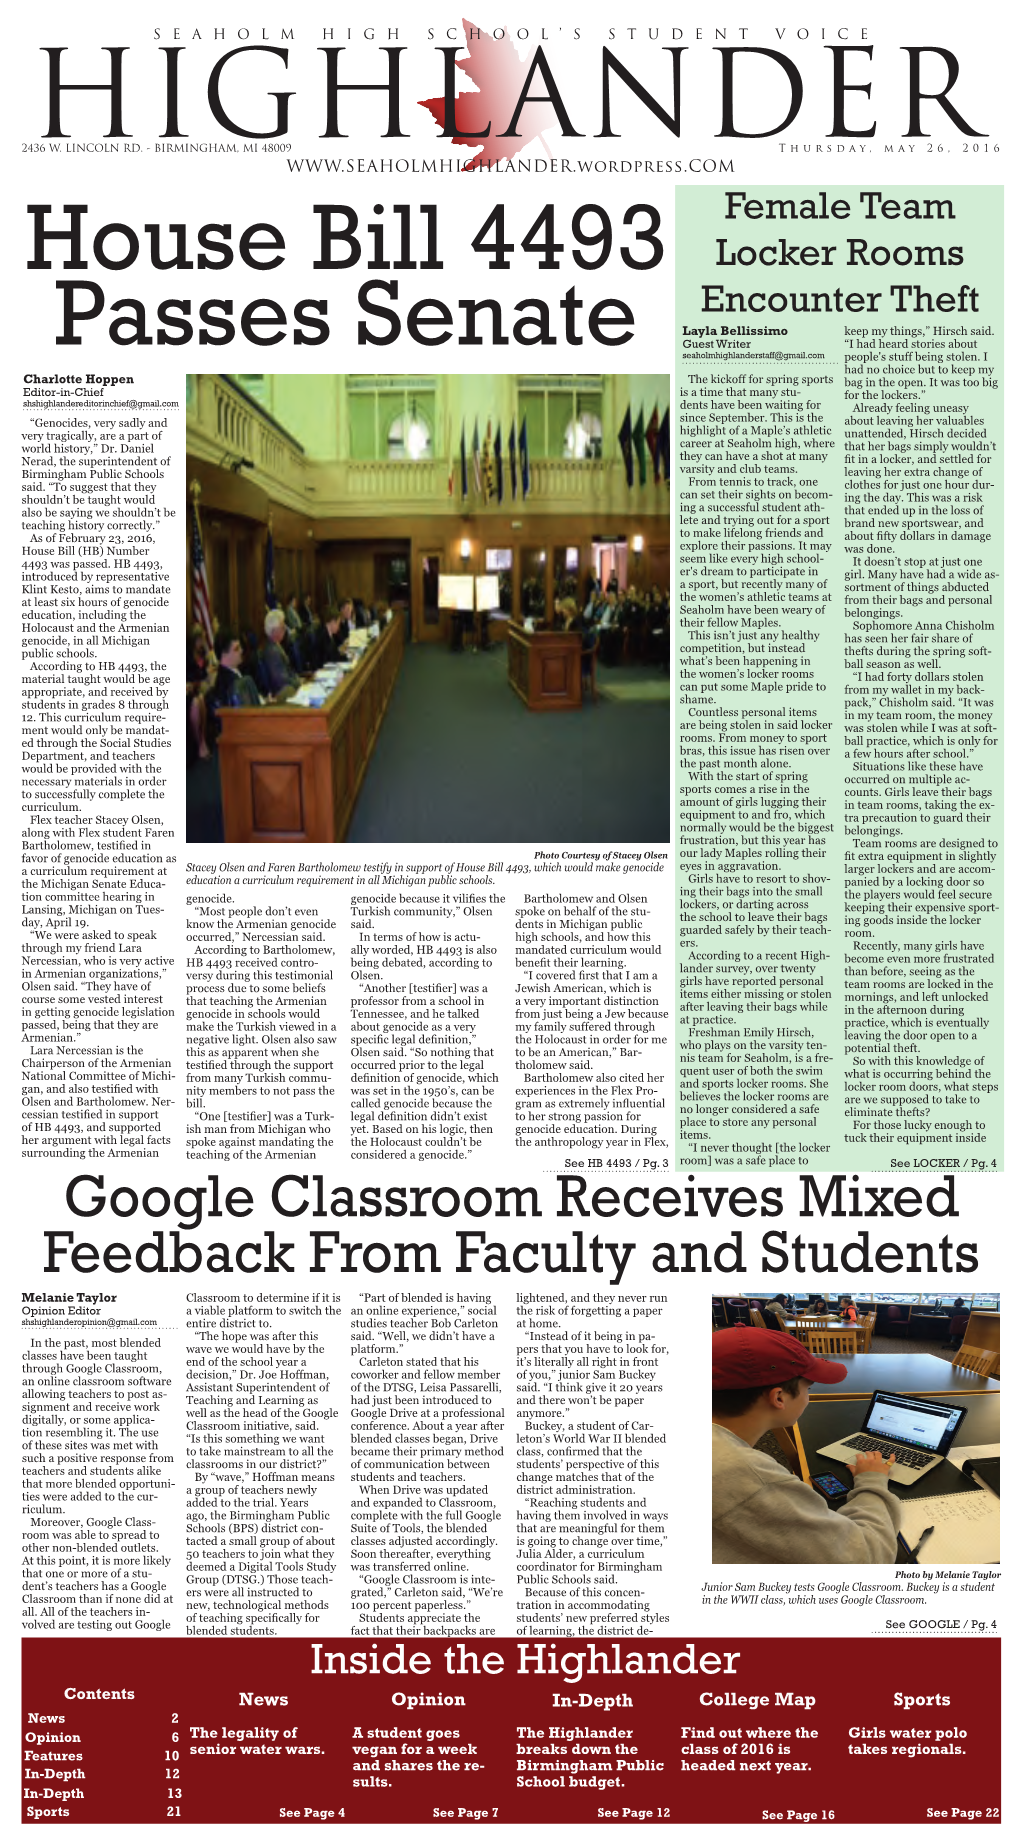 Google Classroom Receives Mixed Feedback from Faculty and Students